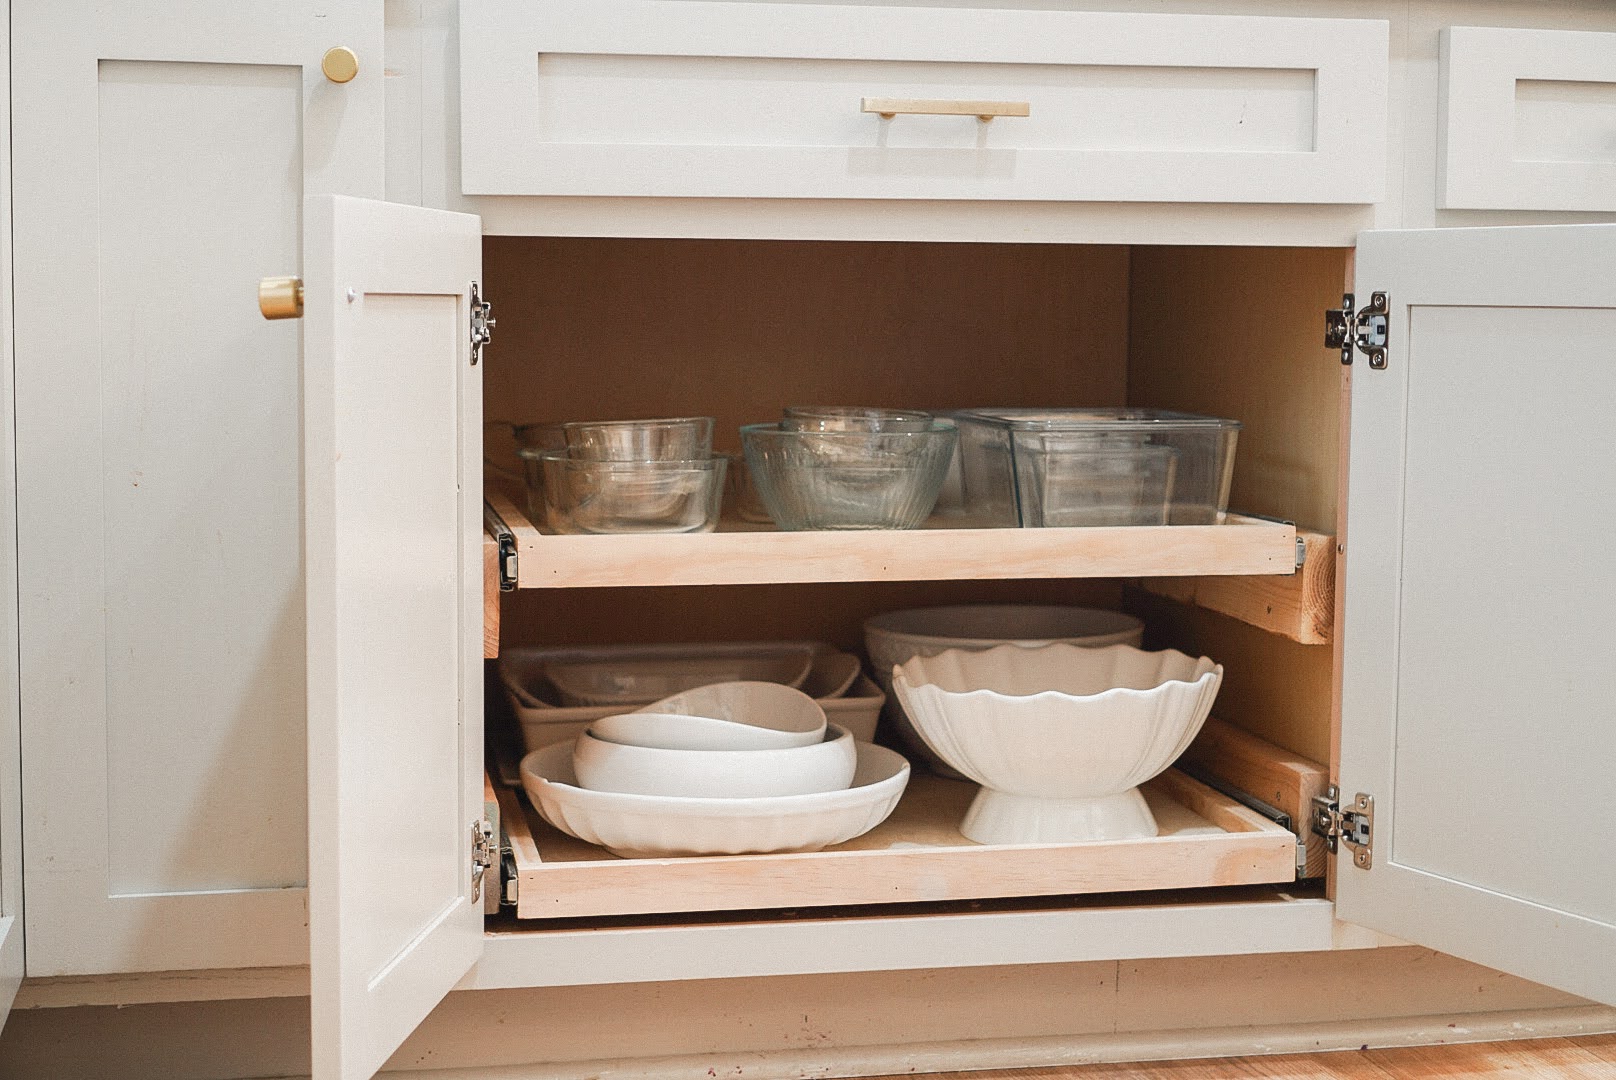 Easy to Build Kitchen Cabinet Pull-Out Shelving! - Crystel Montenegro Home